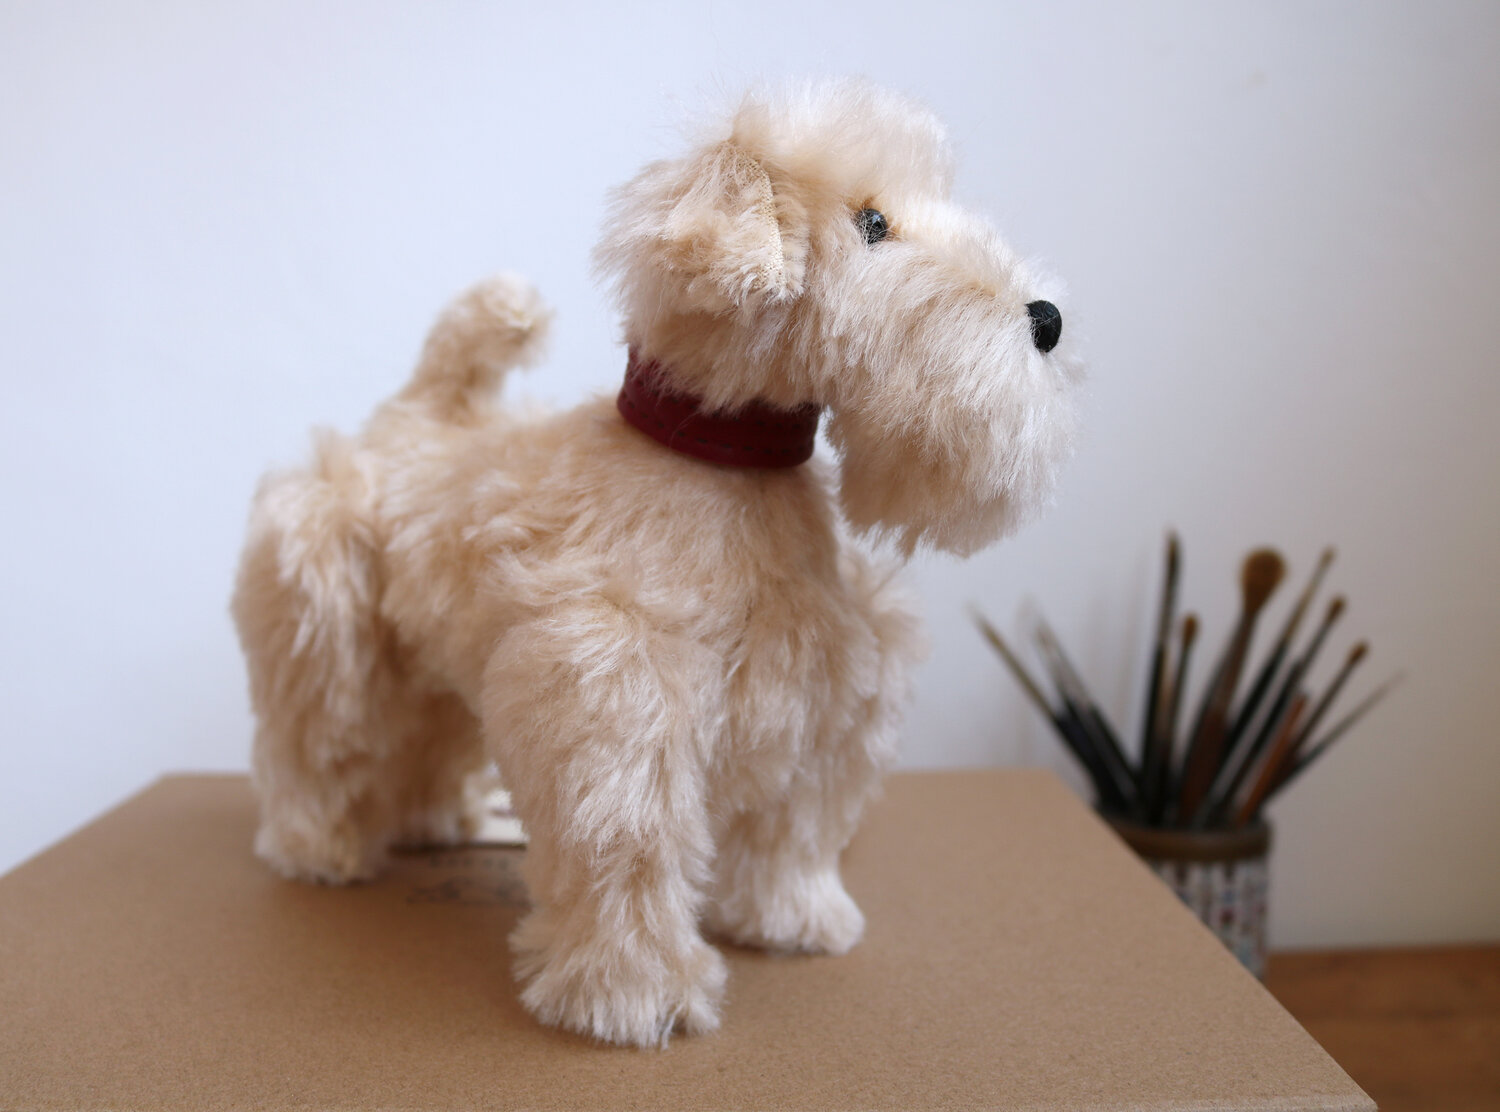 Small Soft Coated Wheaten Terrier銅犬クッキーカッター 調理・製菓道具